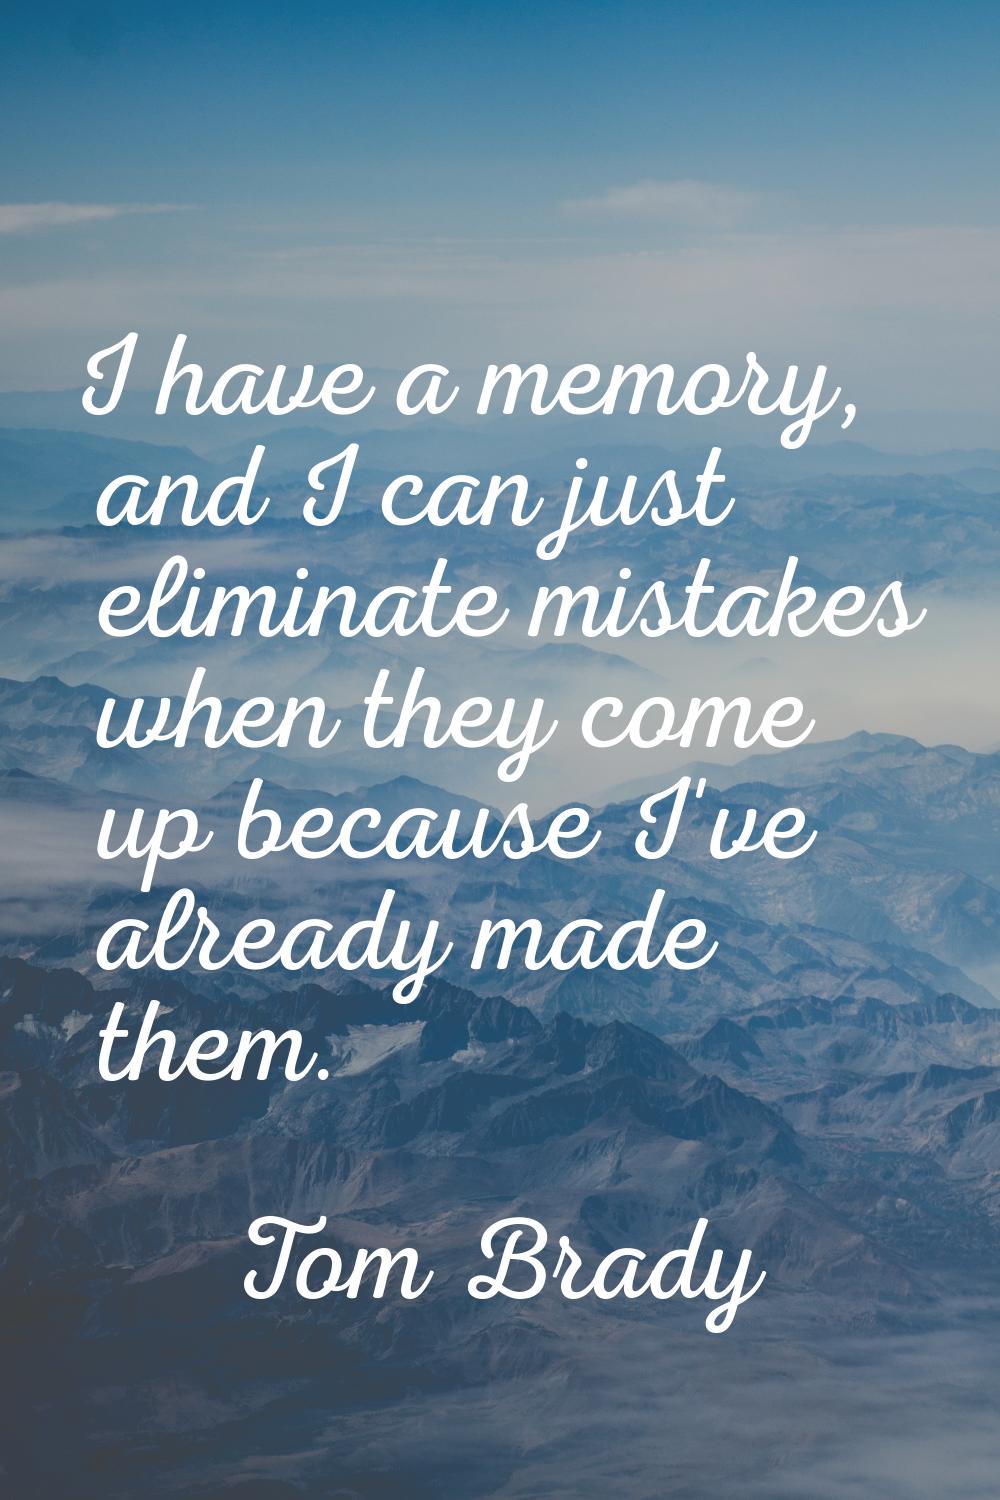 I have a memory, and I can just eliminate mistakes when they come up because I've already made them